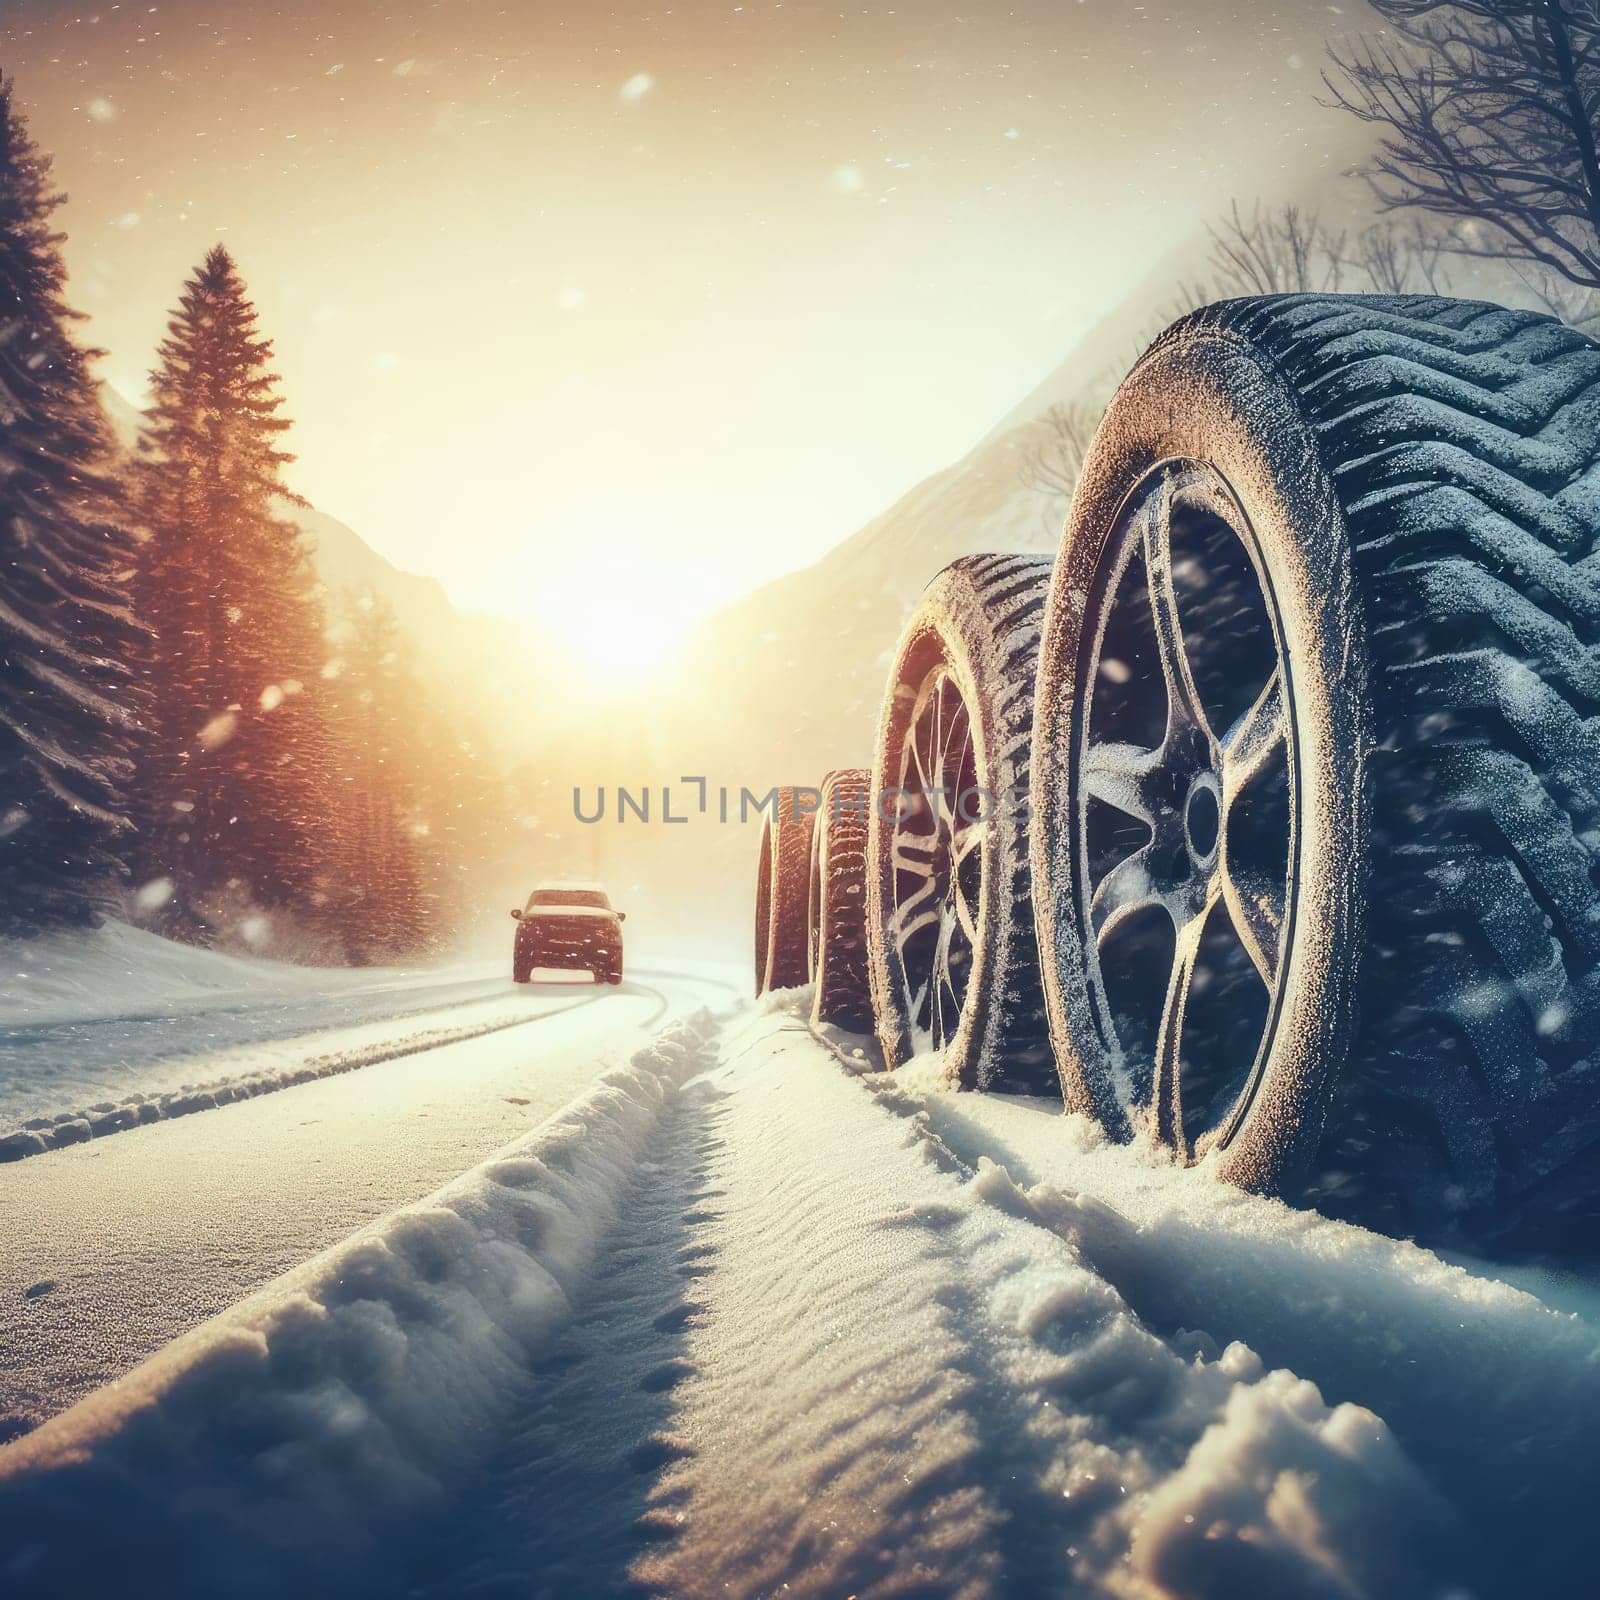 close up different winter tires on a snowy road in the mountains - snow storm by Kobysh